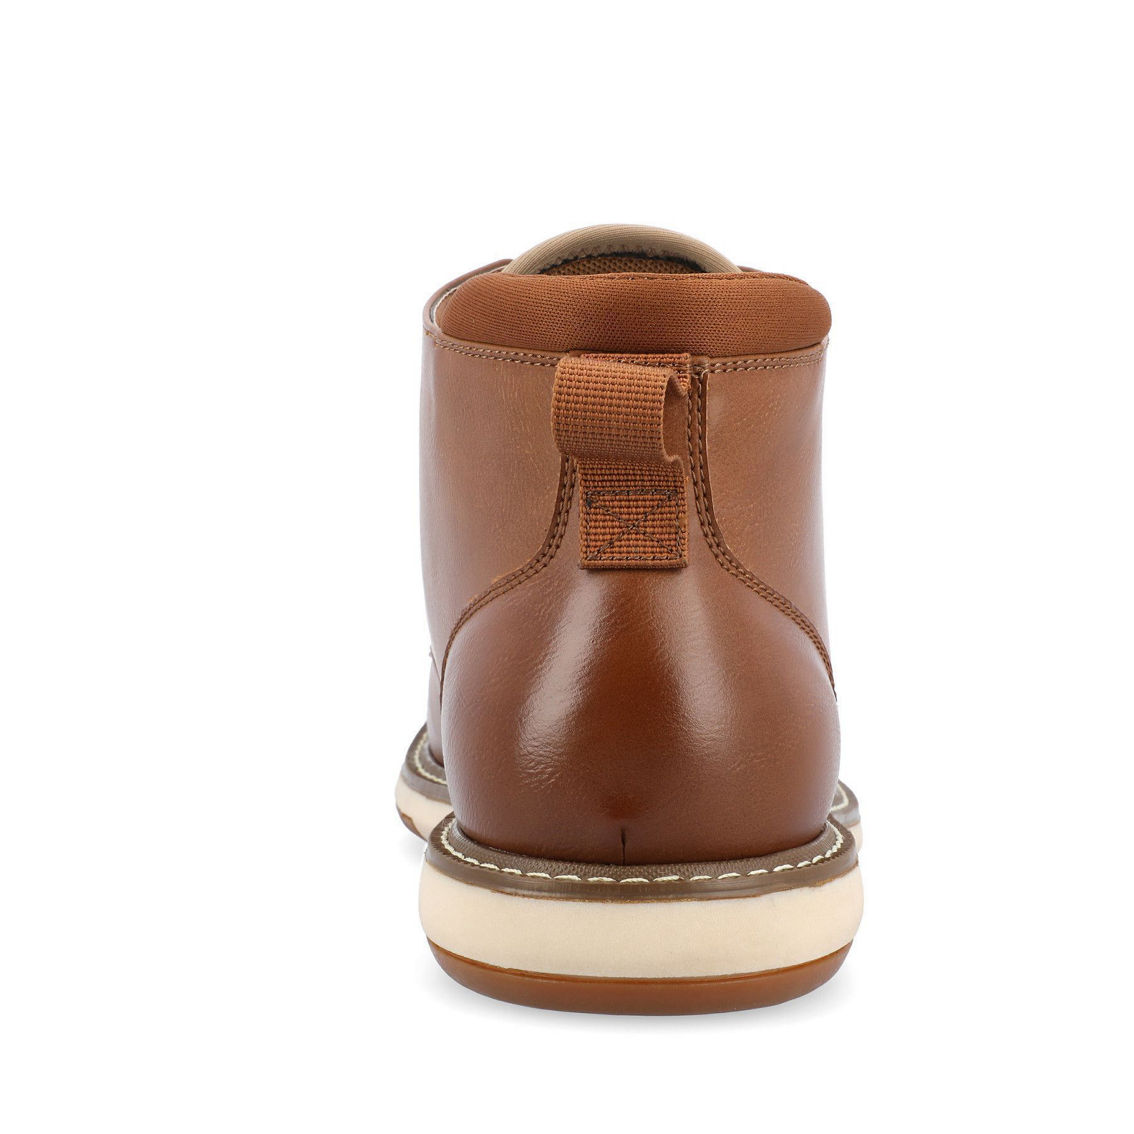 Vance Co. Redford Lace-up Hybrid Chukka Boot - Image 3 of 5